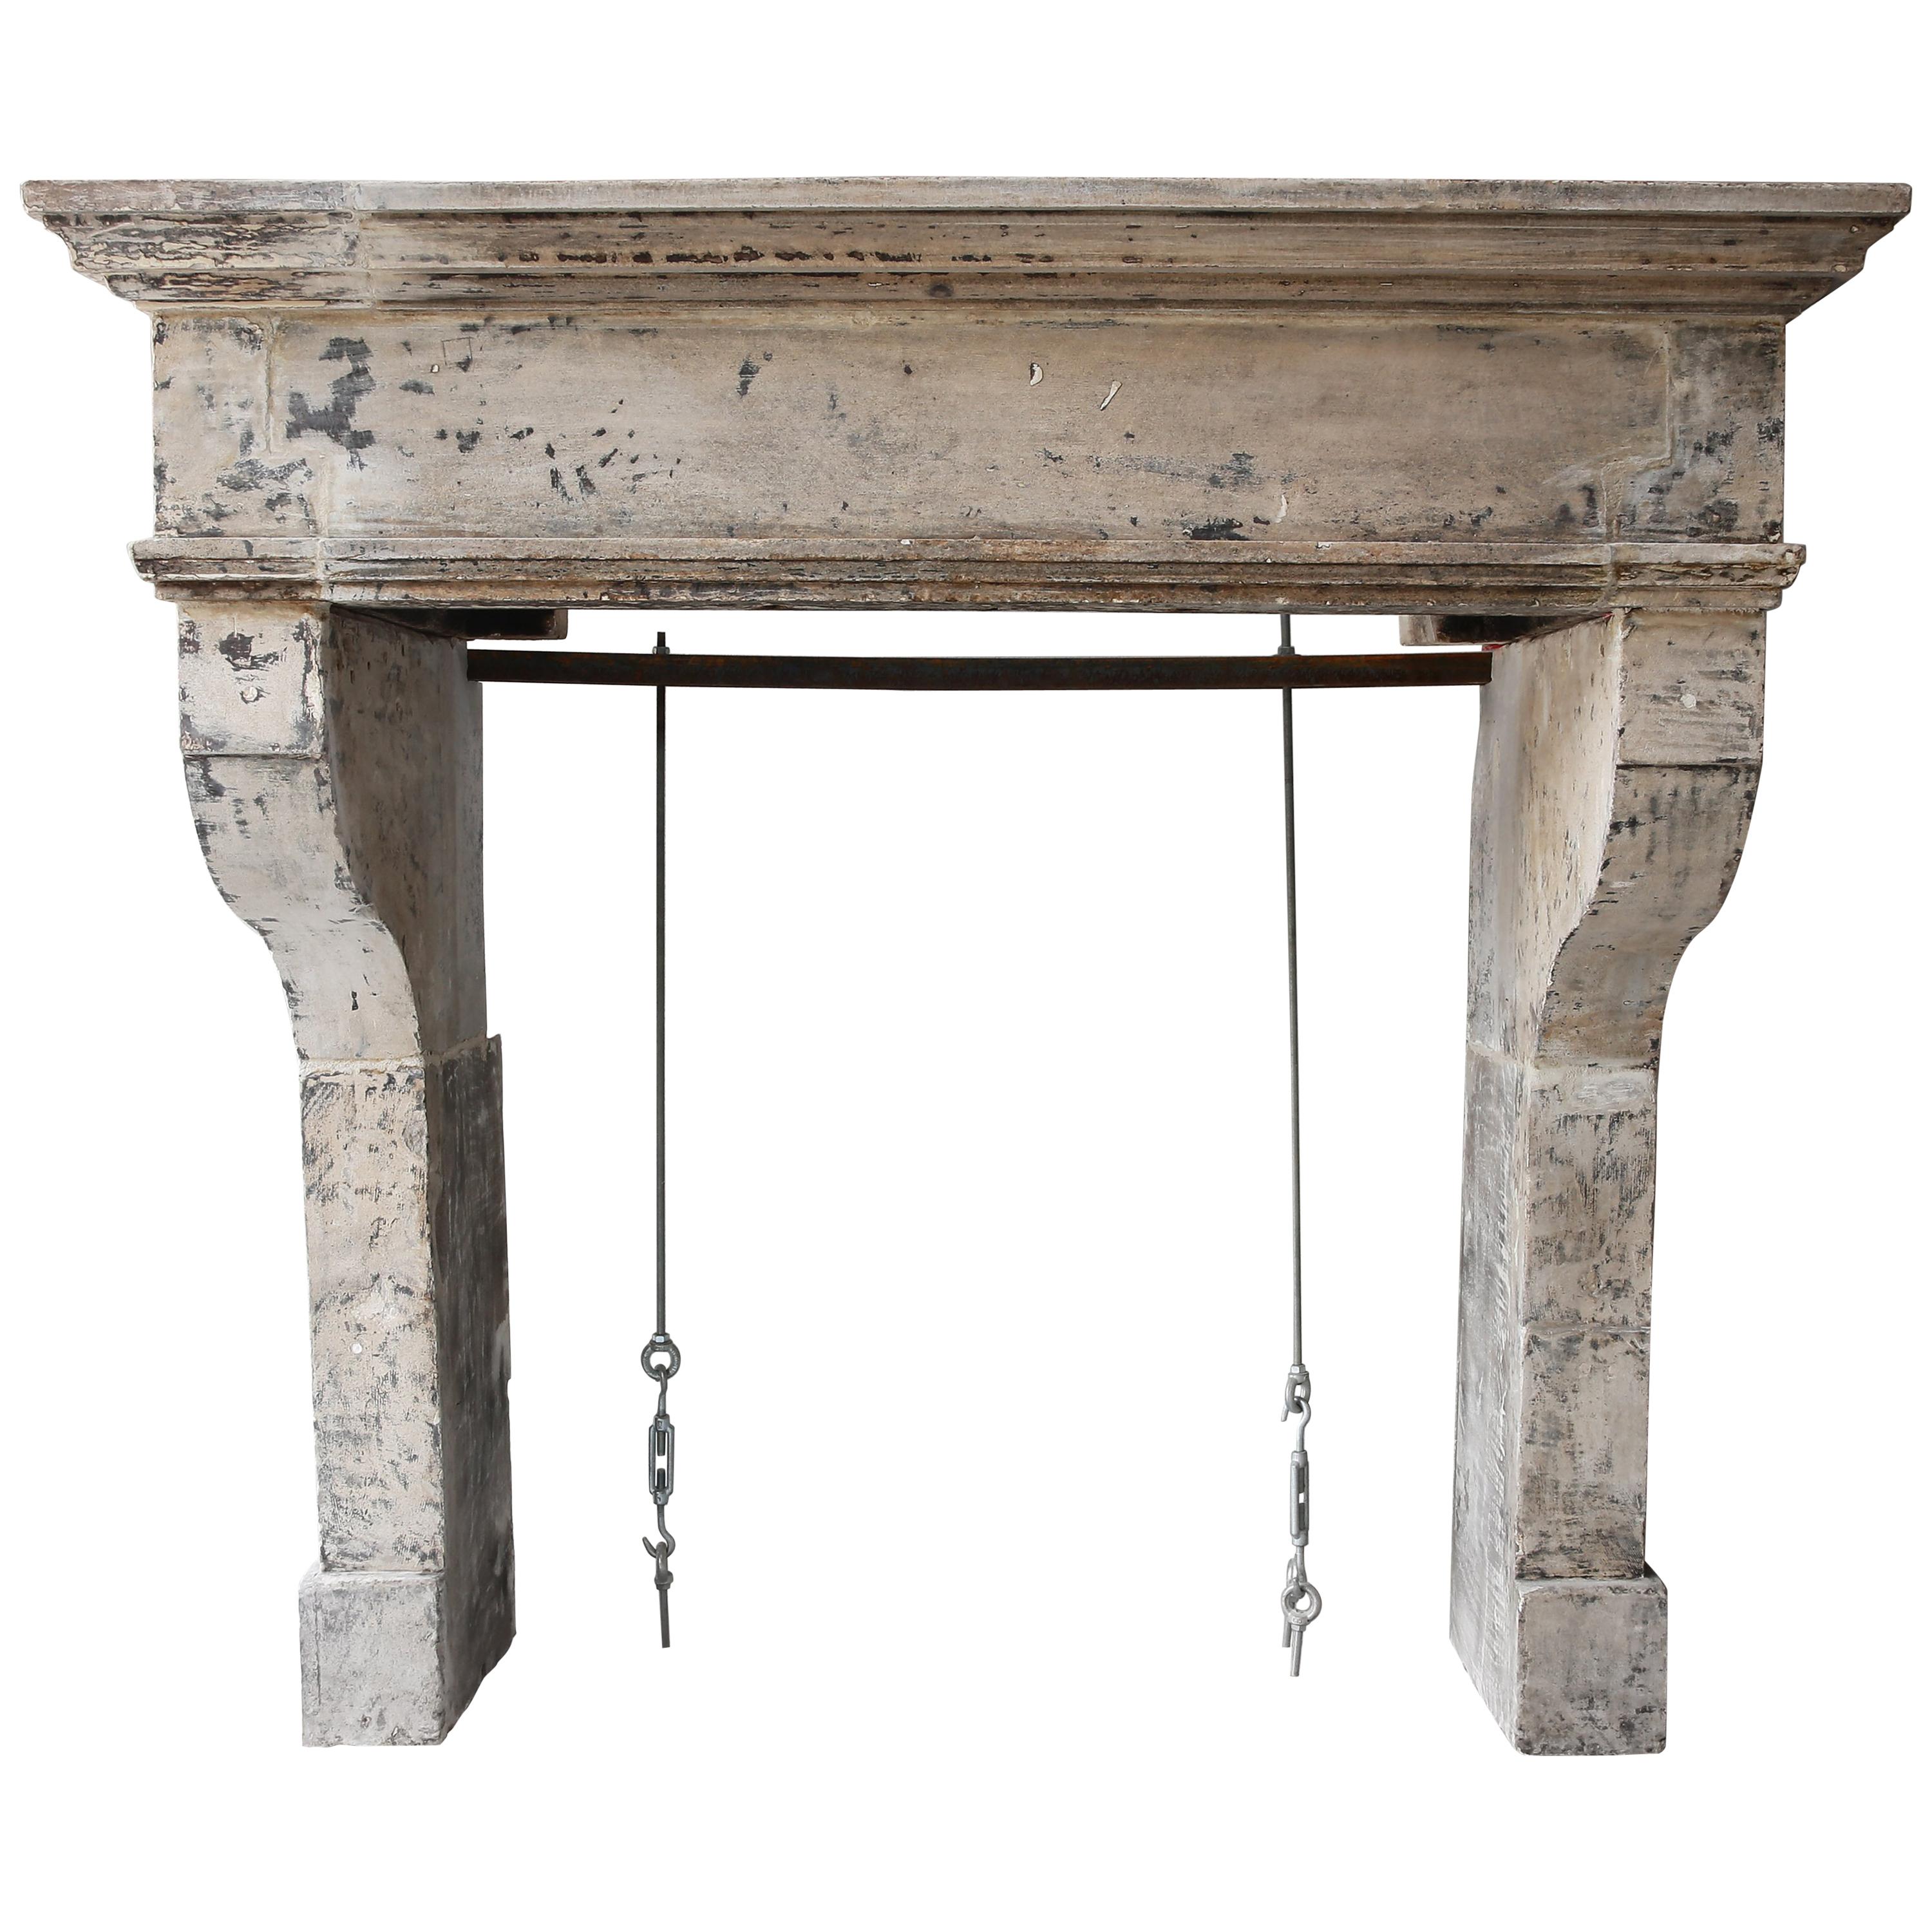 Antique Mantelpiece from the 19th Century, French Limestone, Campagnarde Style